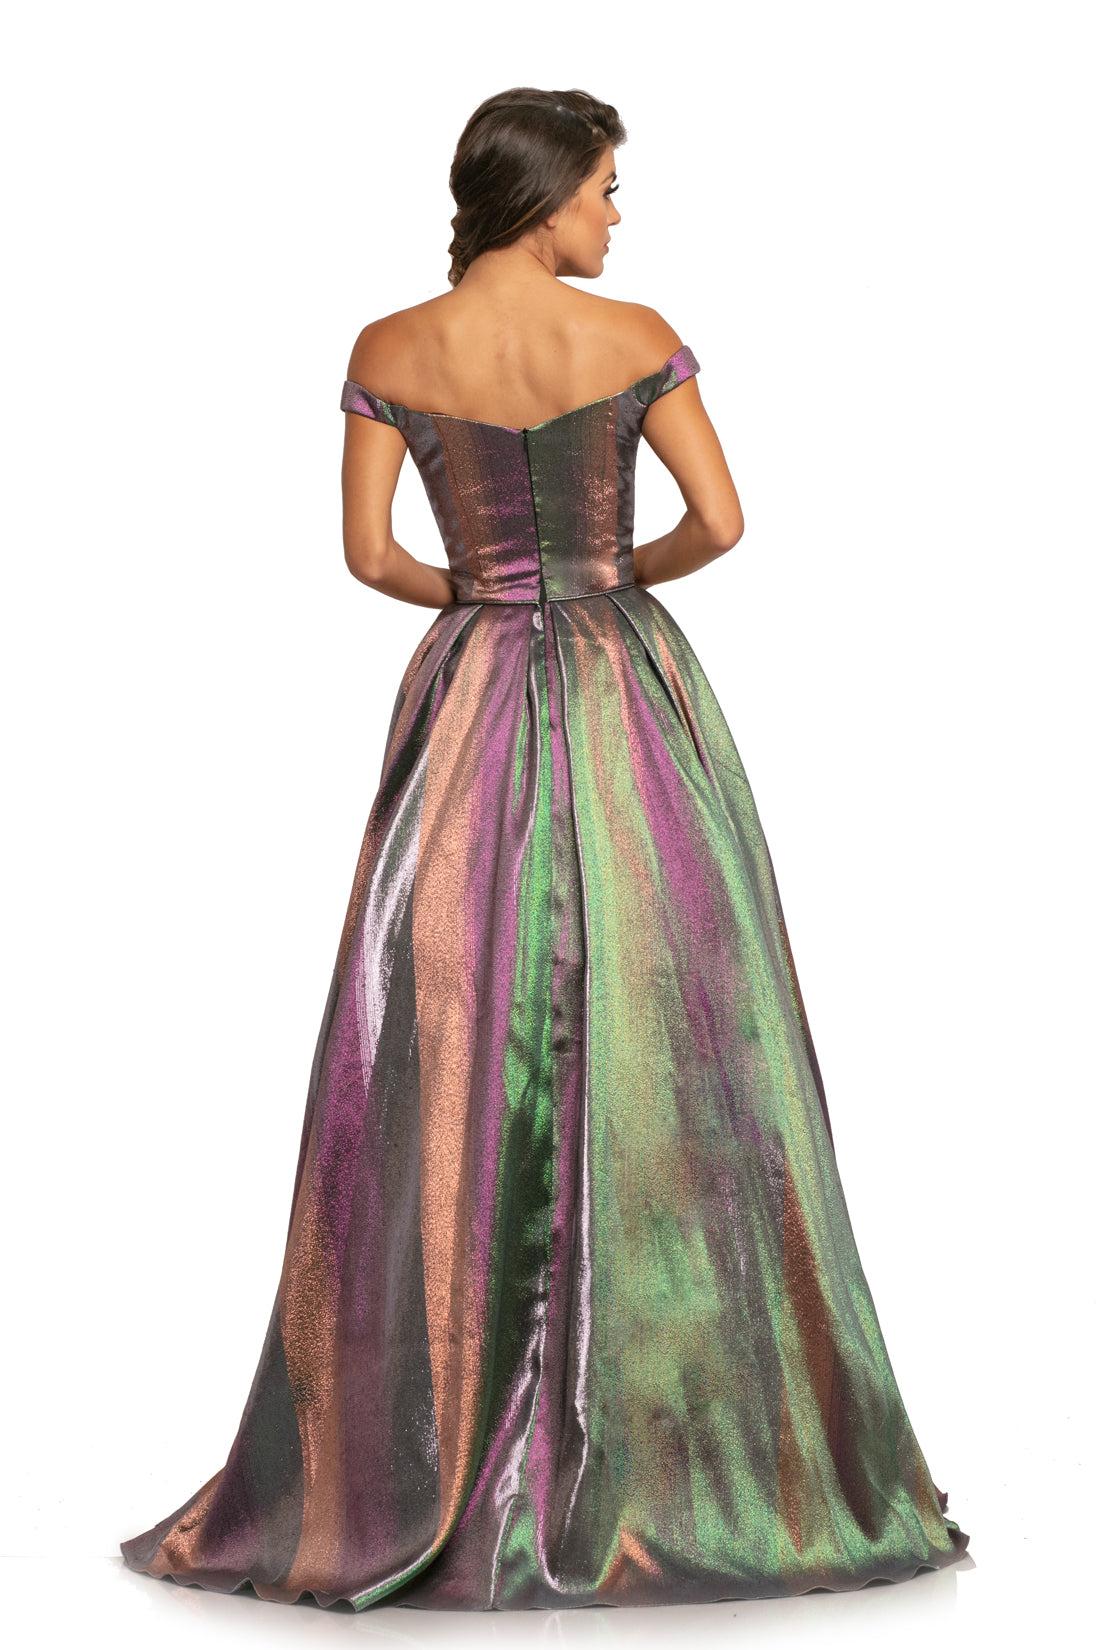 Johnathan Kayne 2019 is a Magical Gown. Get Glam Vibes with this Iridescent Metallic Shimmer Brocade Fabric & Romantic off the shoulder straps and Plunging Neckline. Did someone say unicorn affect!? The off-the-shoulder sweetheart bodice mixed with this beautiful metallic brocade is giving all the unicorn-ombre vibes that you need.